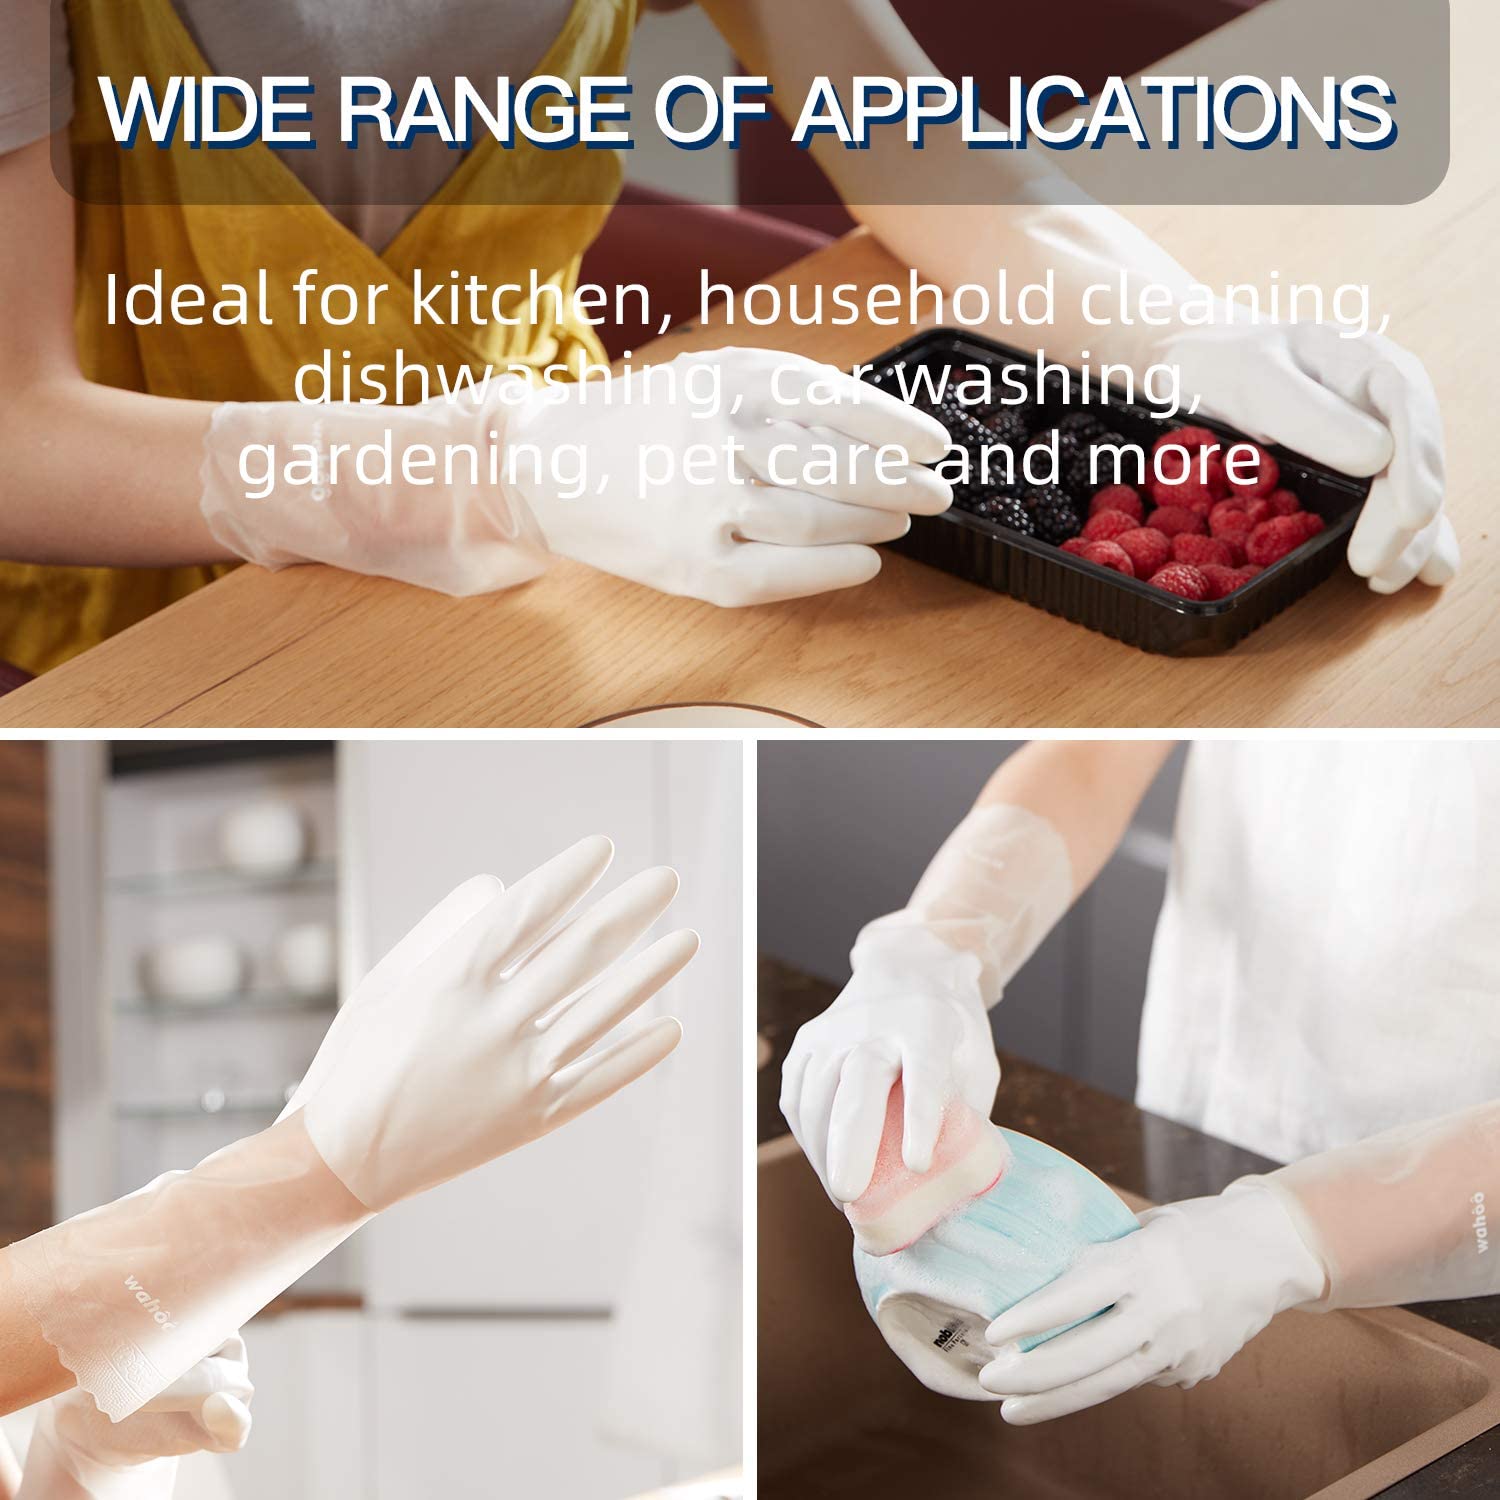 LANON Liquid Silicone Gloves, Heat Resistant Oven Gloves with Fingers, Food  Grade, Waterproof, White, Large